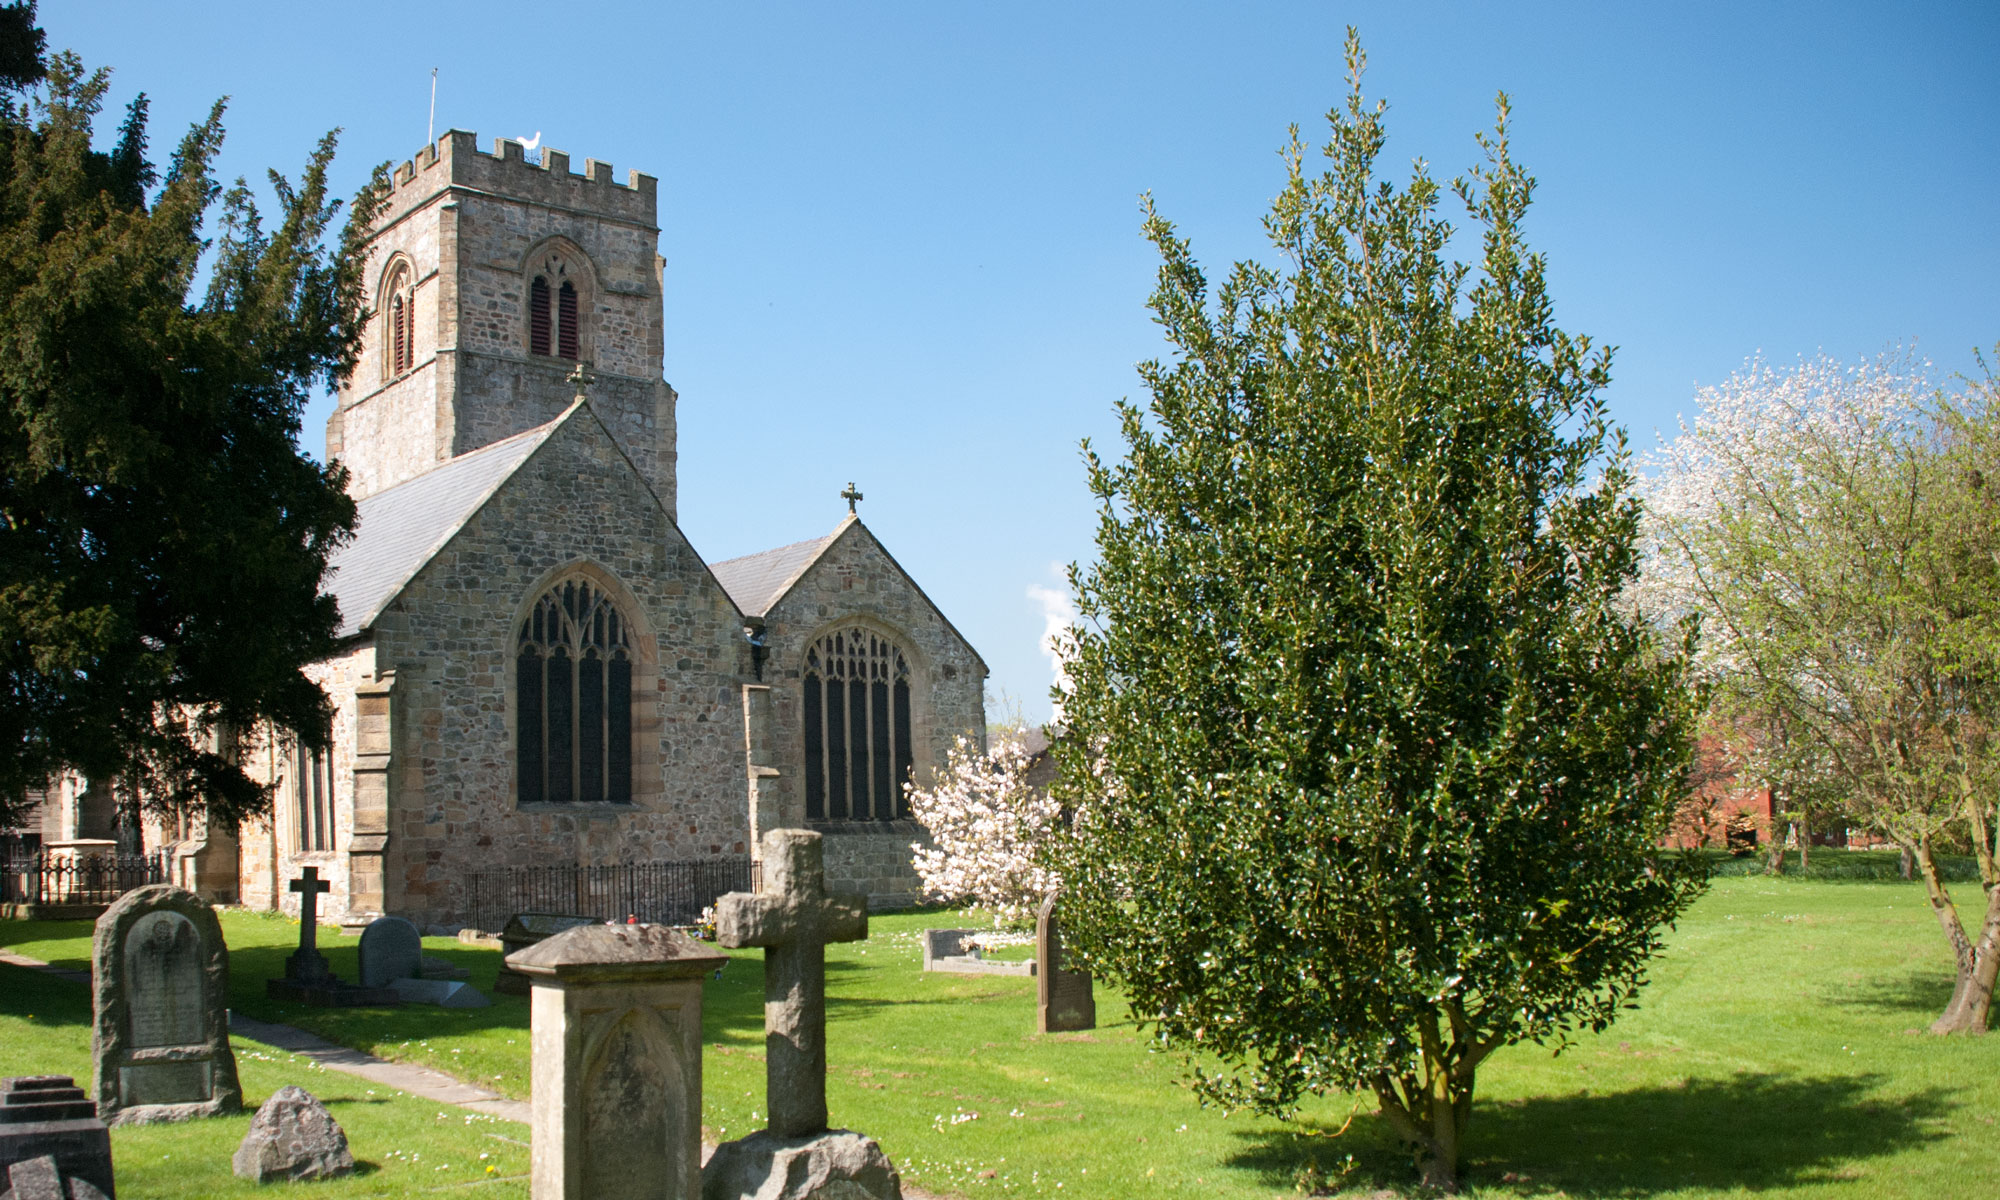 St Mary's Church, Chirk